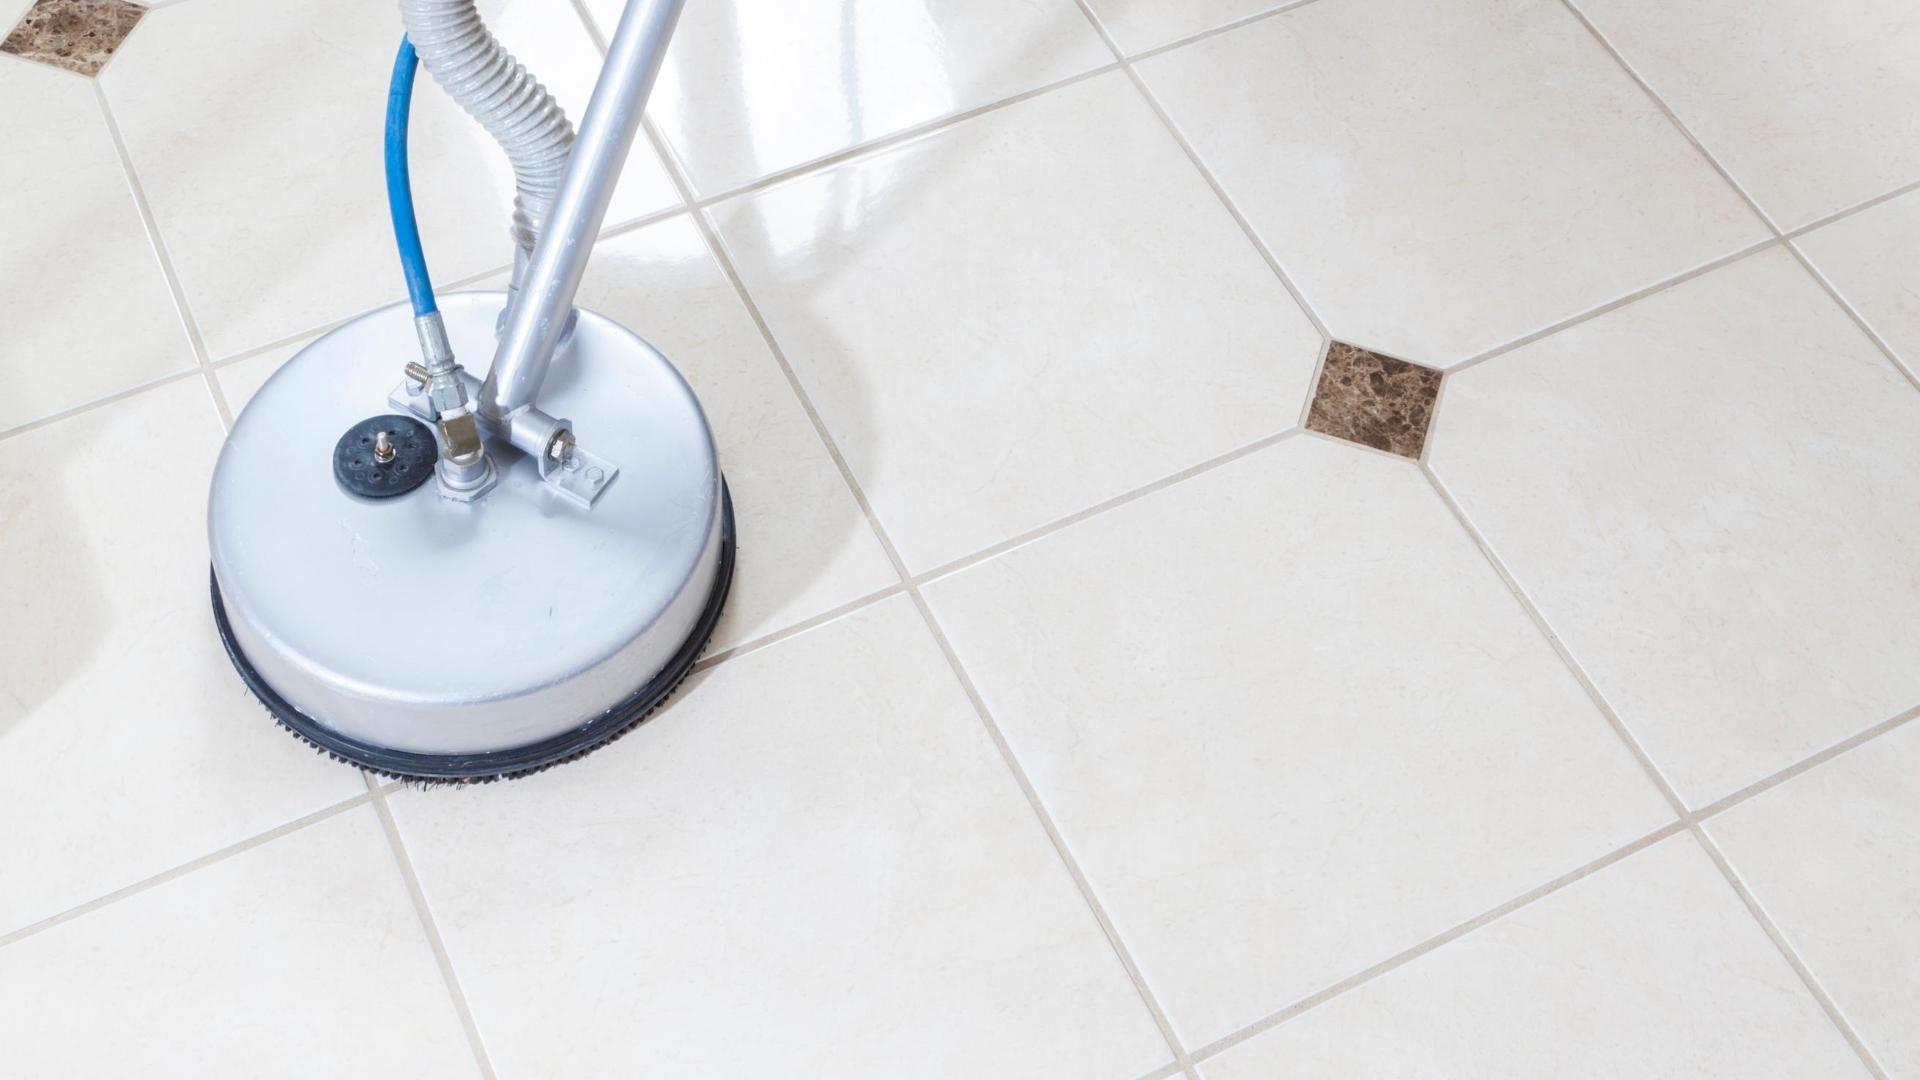 Grout & Tile Cleaning Service